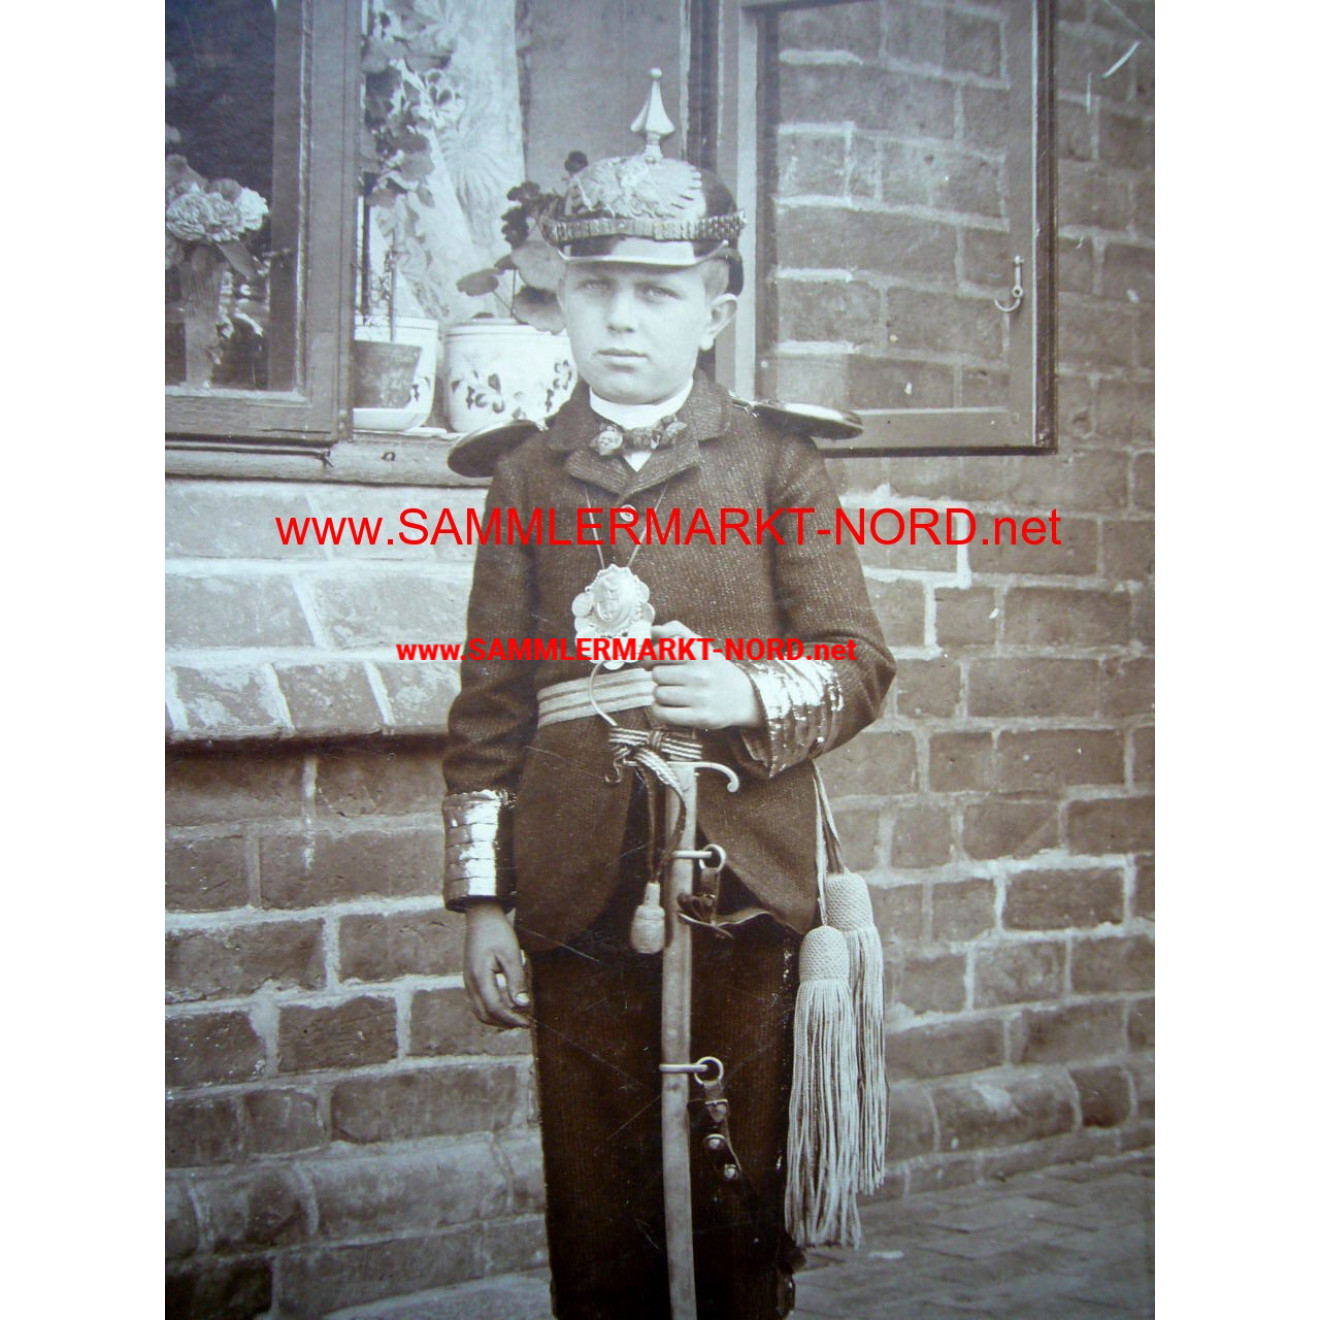 Cabinet photo - child in uniform with spiked helmet